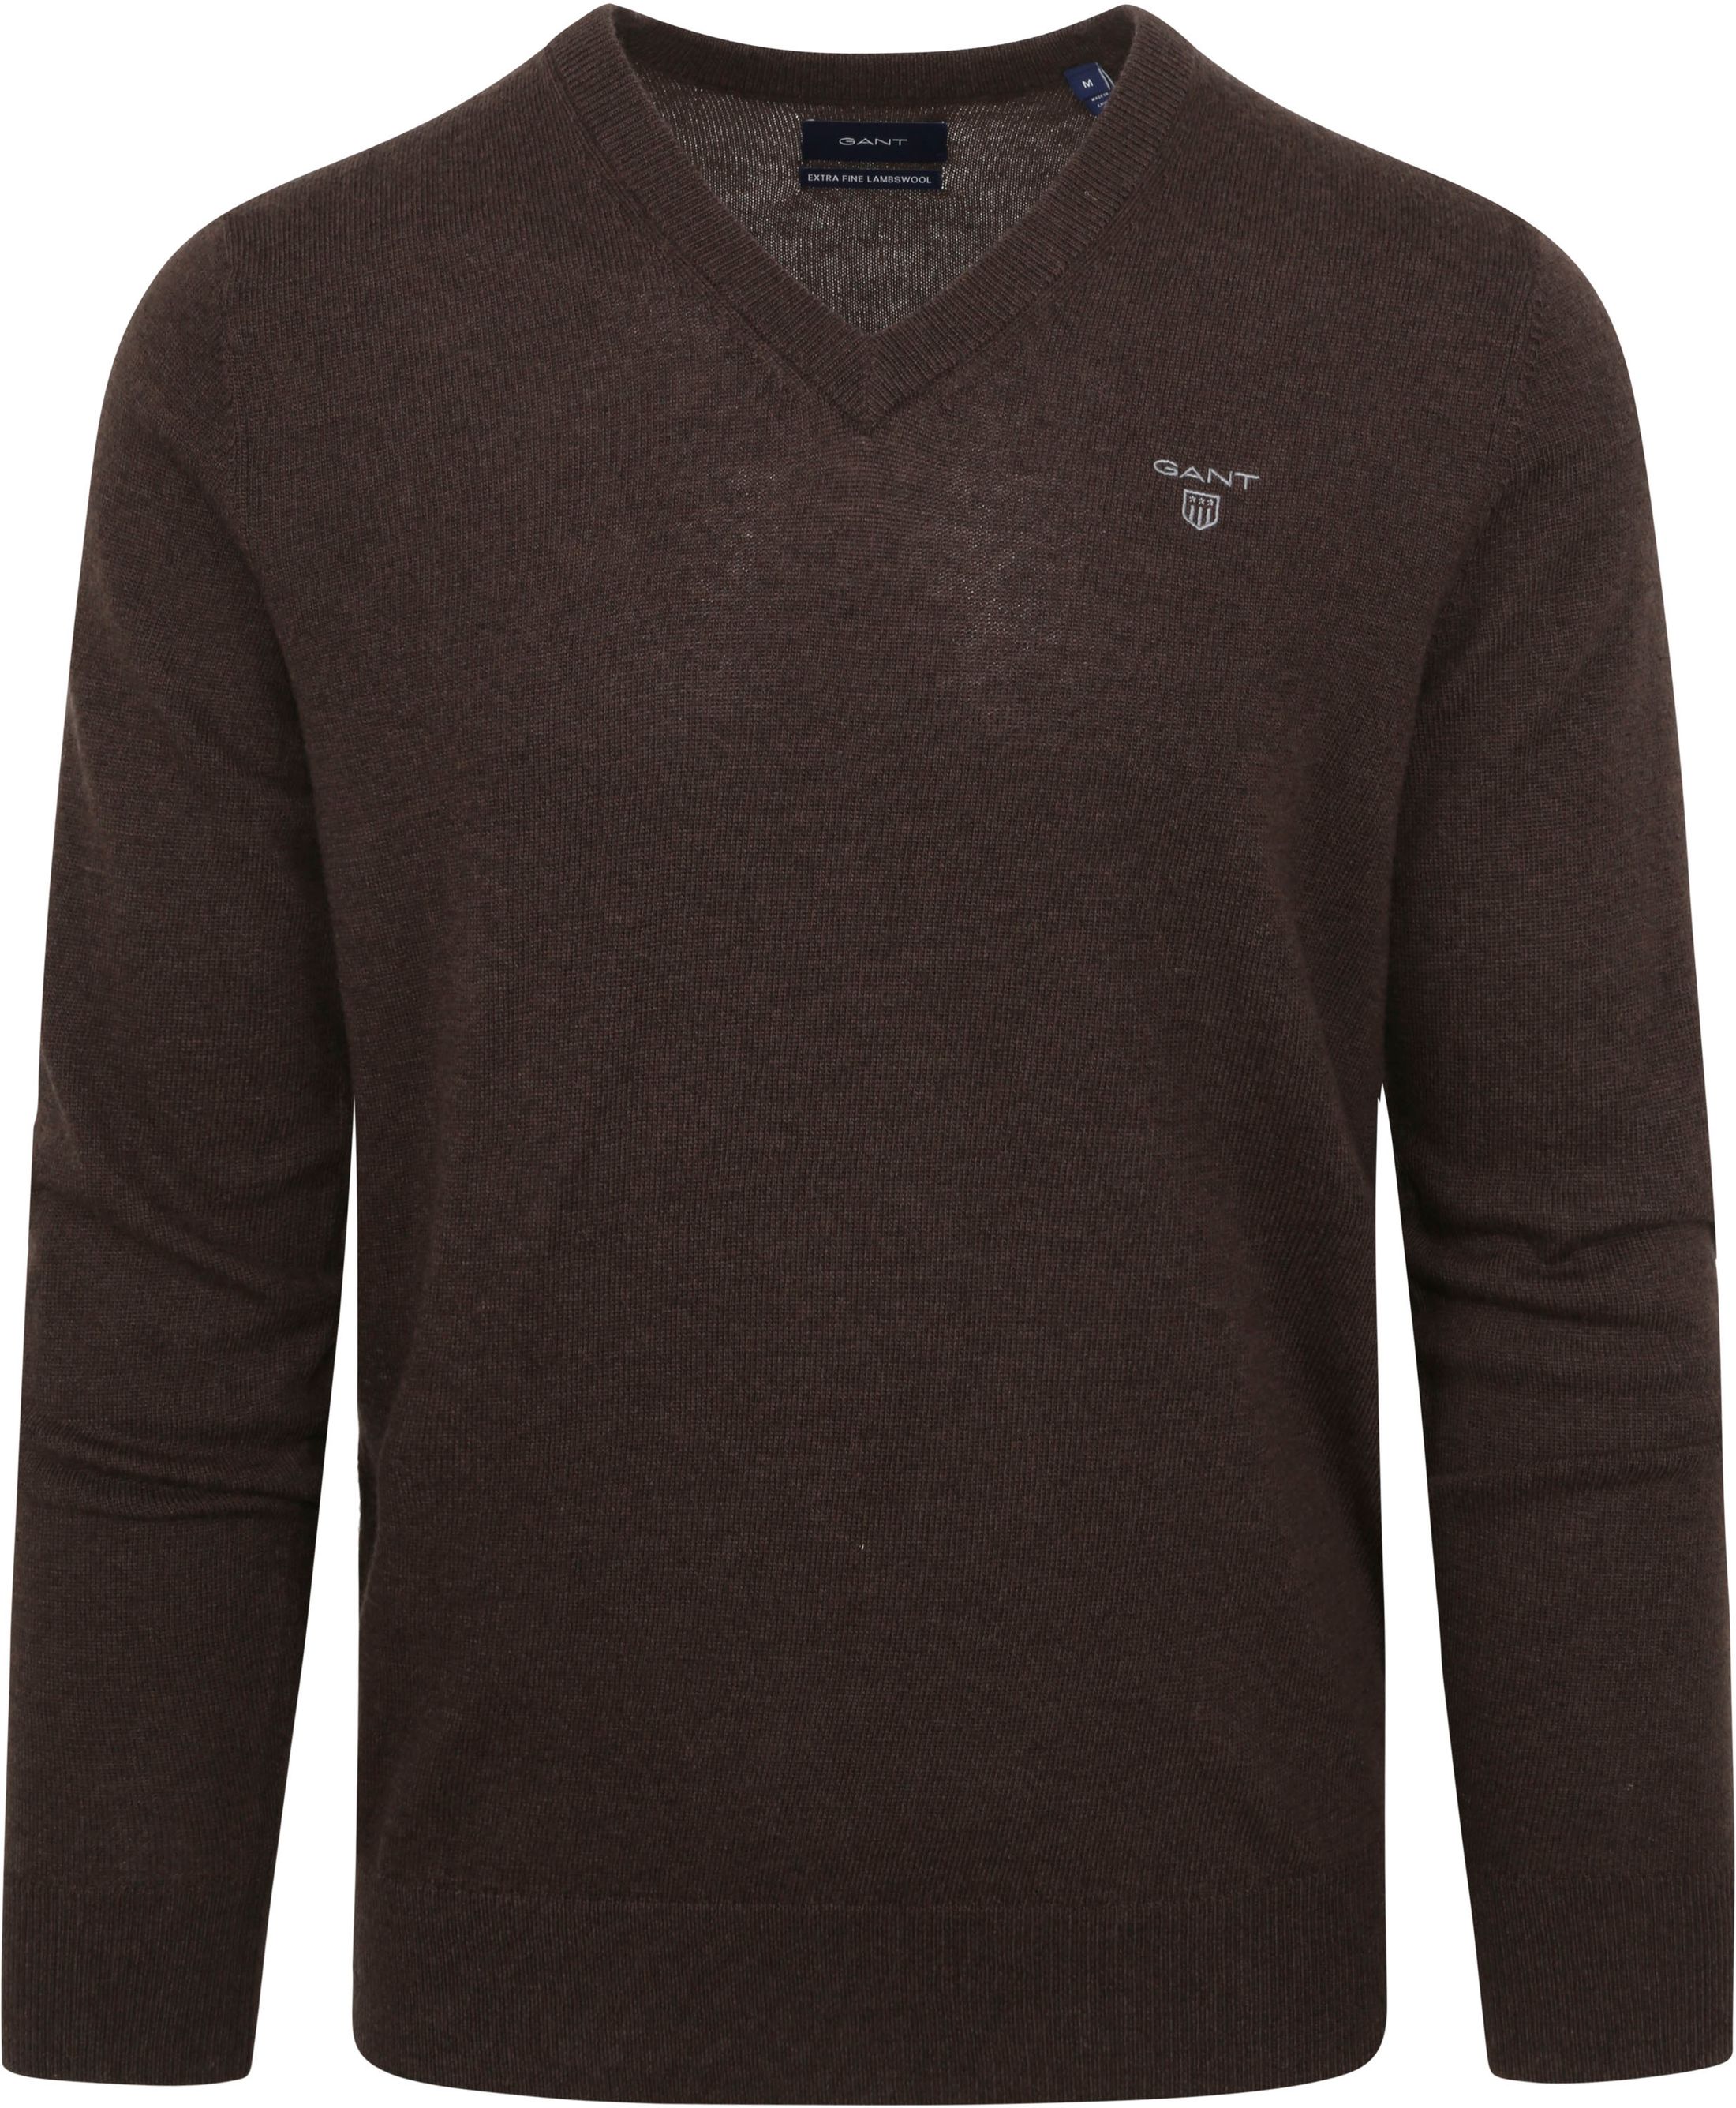 Gant Sweater Lambswool V-Neck Brown size 3XL